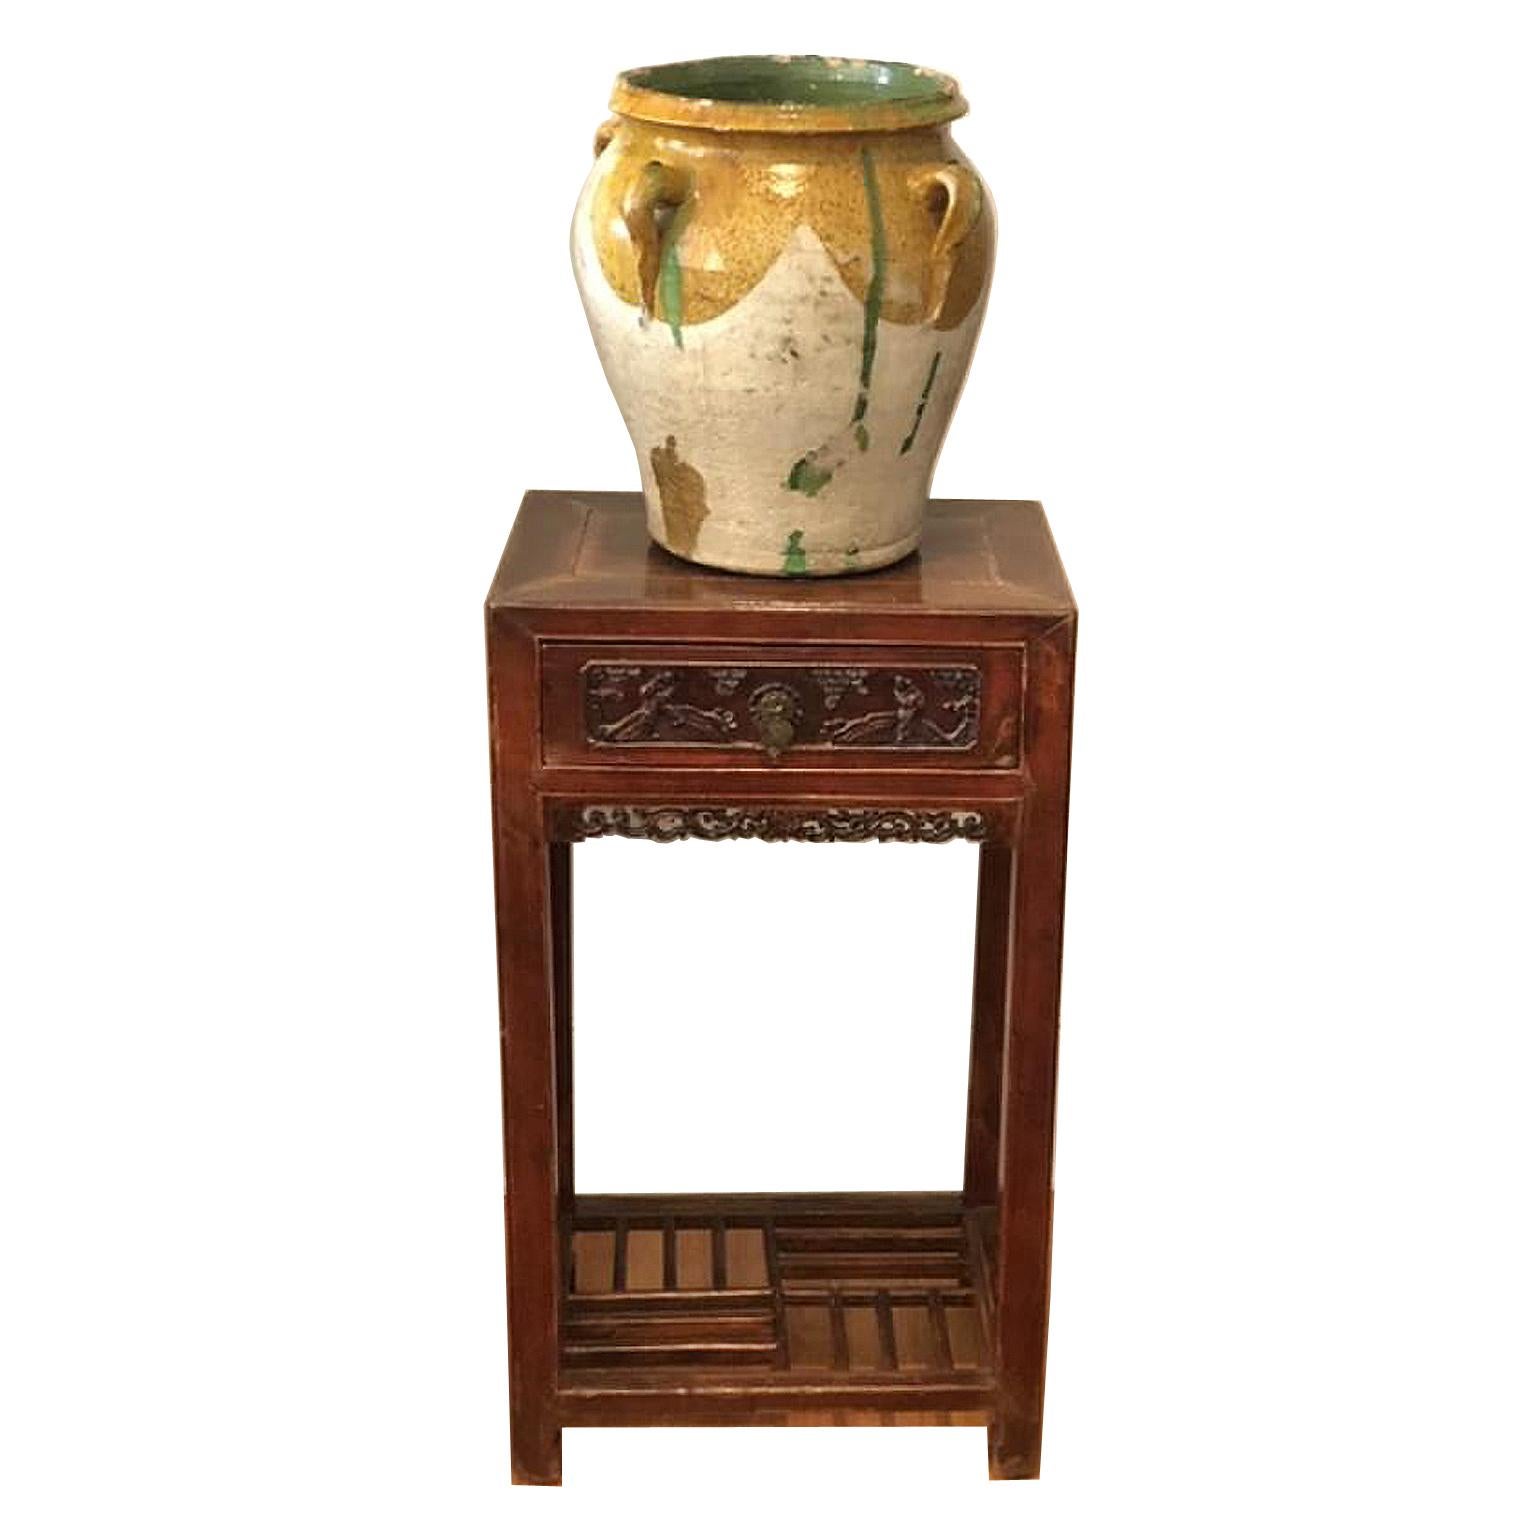 A very beautiful and large terracotta pot or urn with white under-glazing and mustard yellow and green over-glazing, with four handles, France, circa 1800s. The lovely patina that shows wear and use, gained over its long history, is this urn's most